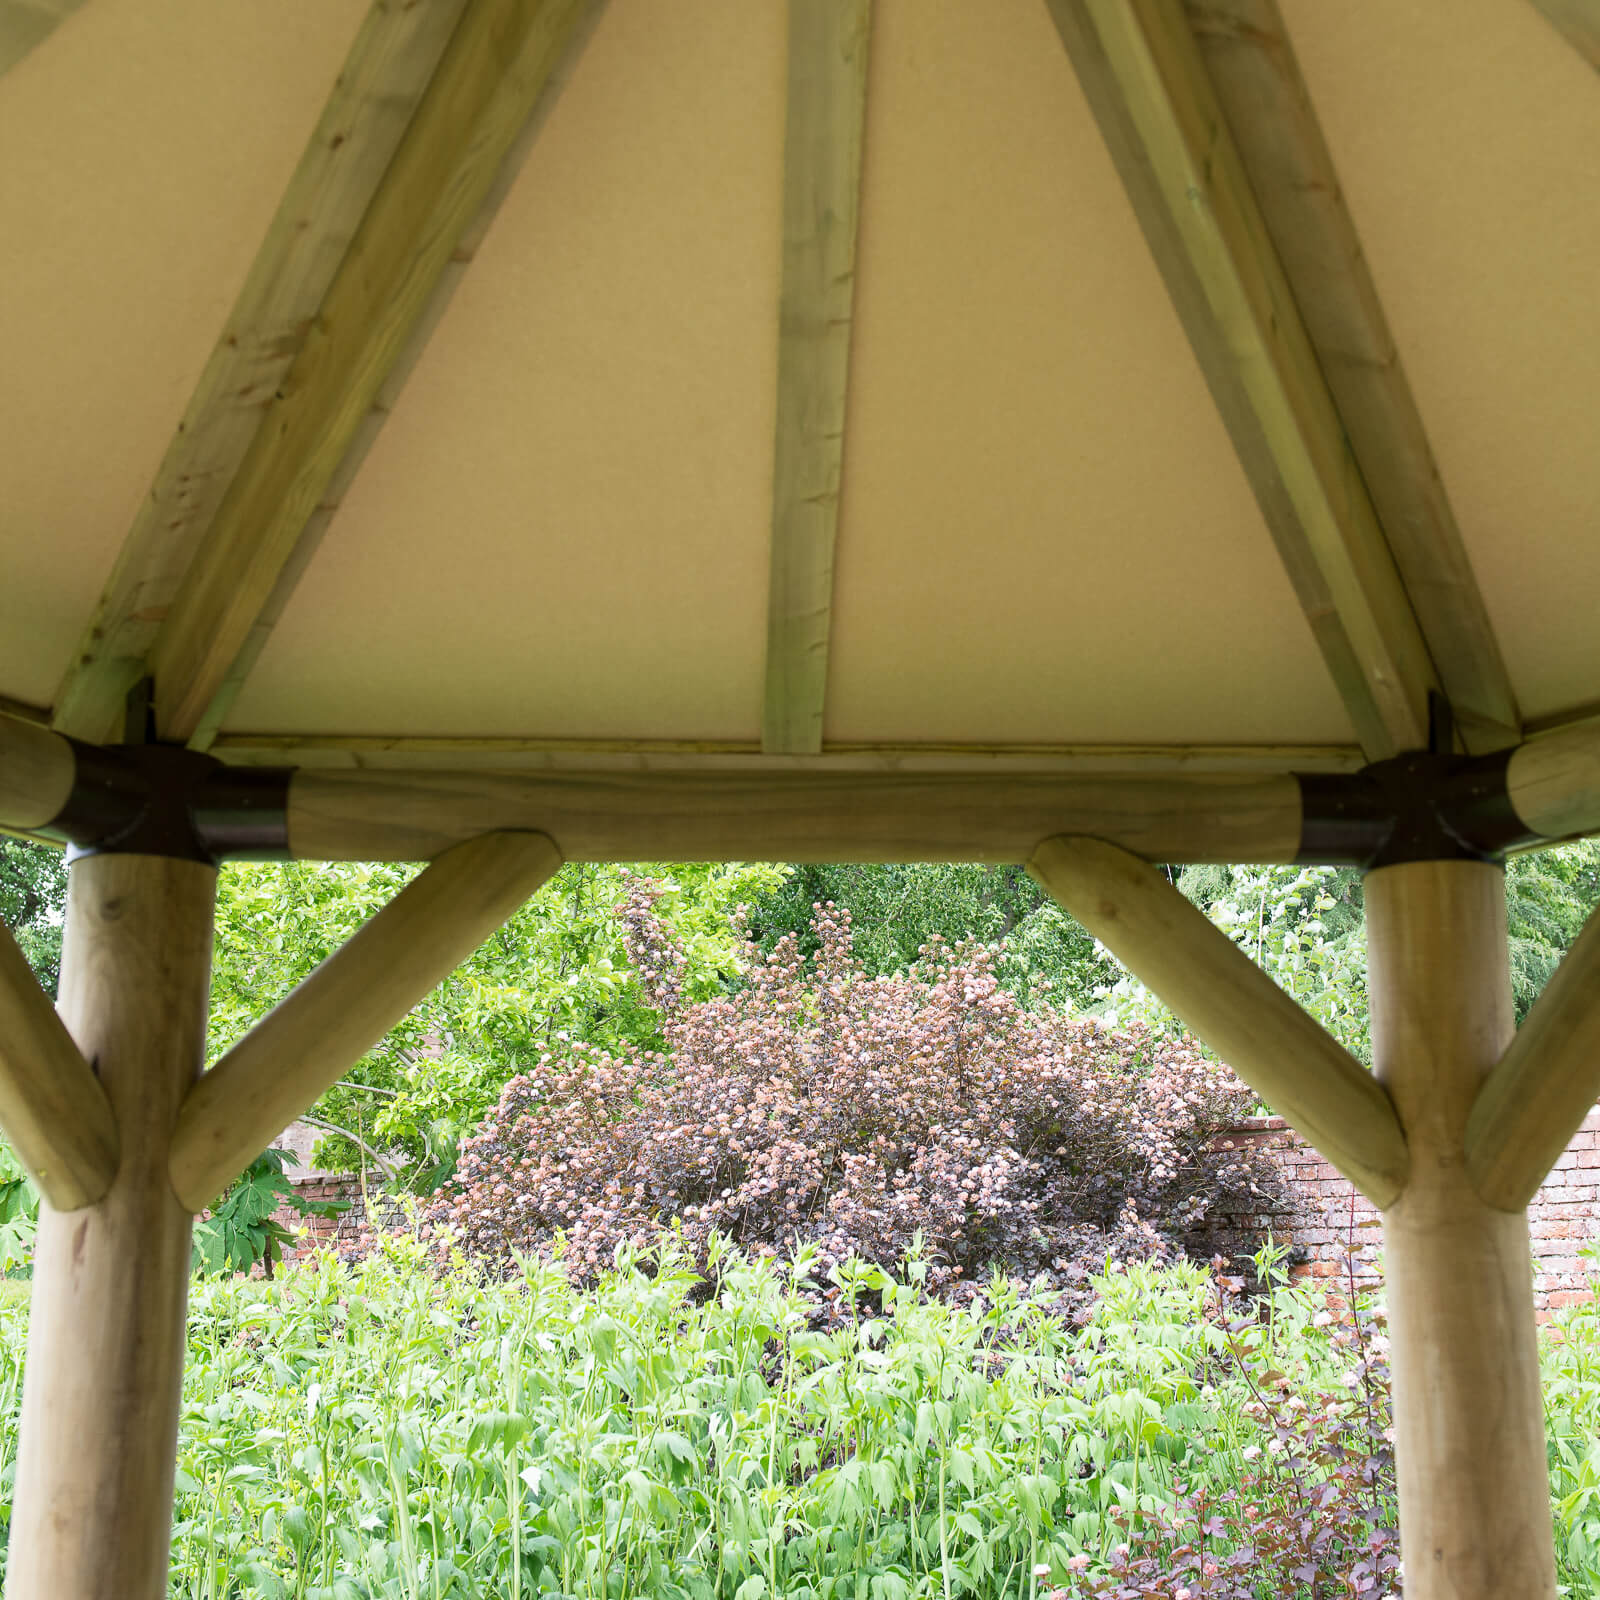 Forest (Installation Included) Timber Roof Gazebo - 3m